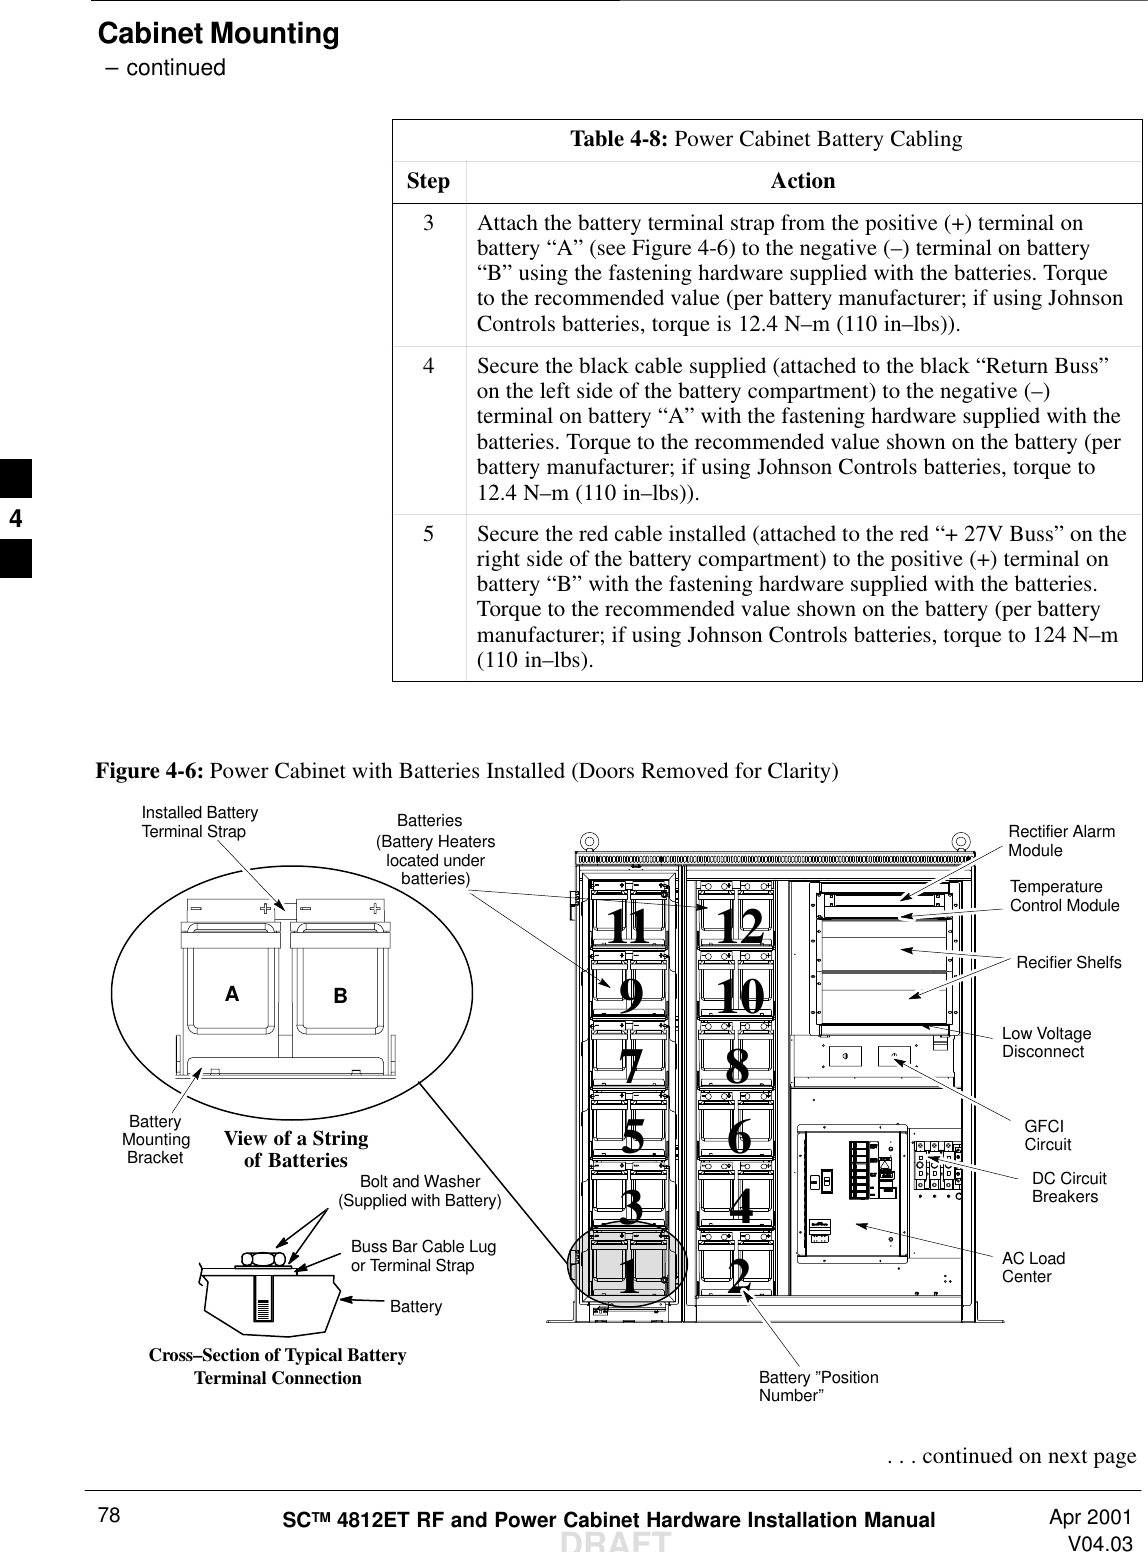 Cabinet Mounting – continuedDRAFTSCTM 4812ET RF and Power Cabinet Hardware Installation Manual Apr 2001V04.0378Table 4-8: Power Cabinet Battery CablingStep Action3Attach the battery terminal strap from the positive (+) terminal onbattery “A” (see Figure 4-6) to the negative (–) terminal on battery“B” using the fastening hardware supplied with the batteries. Torqueto the recommended value (per battery manufacturer; if using JohnsonControls batteries, torque is 12.4 N–m (110 in–lbs)).4Secure the black cable supplied (attached to the black “Return Buss”on the left side of the battery compartment) to the negative (–)terminal on battery “A” with the fastening hardware supplied with thebatteries. Torque to the recommended value shown on the battery (perbattery manufacturer; if using Johnson Controls batteries, torque to12.4 N–m (110 in–lbs)).5Secure the red cable installed (attached to the red “+ 27V Buss” on theright side of the battery compartment) to the positive (+) terminal onbattery “B” with the fastening hardware supplied with the batteries.Torque to the recommended value shown on the battery (per batterymanufacturer; if using Johnson Controls batteries, torque to 124 N–m(110 in–lbs). Figure 4-6: Power Cabinet with Batteries Installed (Doors Removed for Clarity)View of a Stringof BatteriesBatteryMountingBracketLow VoltageDisconnectGFCICircuitDC CircuitBreakersAC LoadCenterABRectifier AlarmModule(Battery Heaterslocated underbatteries)BatteriesTemperatureControl ModuleRecifier Shelfs3124657891011 12Battery ”PositionNumber”Installed BatteryTerminal StrapBatteryBuss Bar Cable Lugor Terminal StrapBolt and Washer(Supplied with Battery)Cross–Section of Typical BatteryTerminal Connection . . . continued on next page4